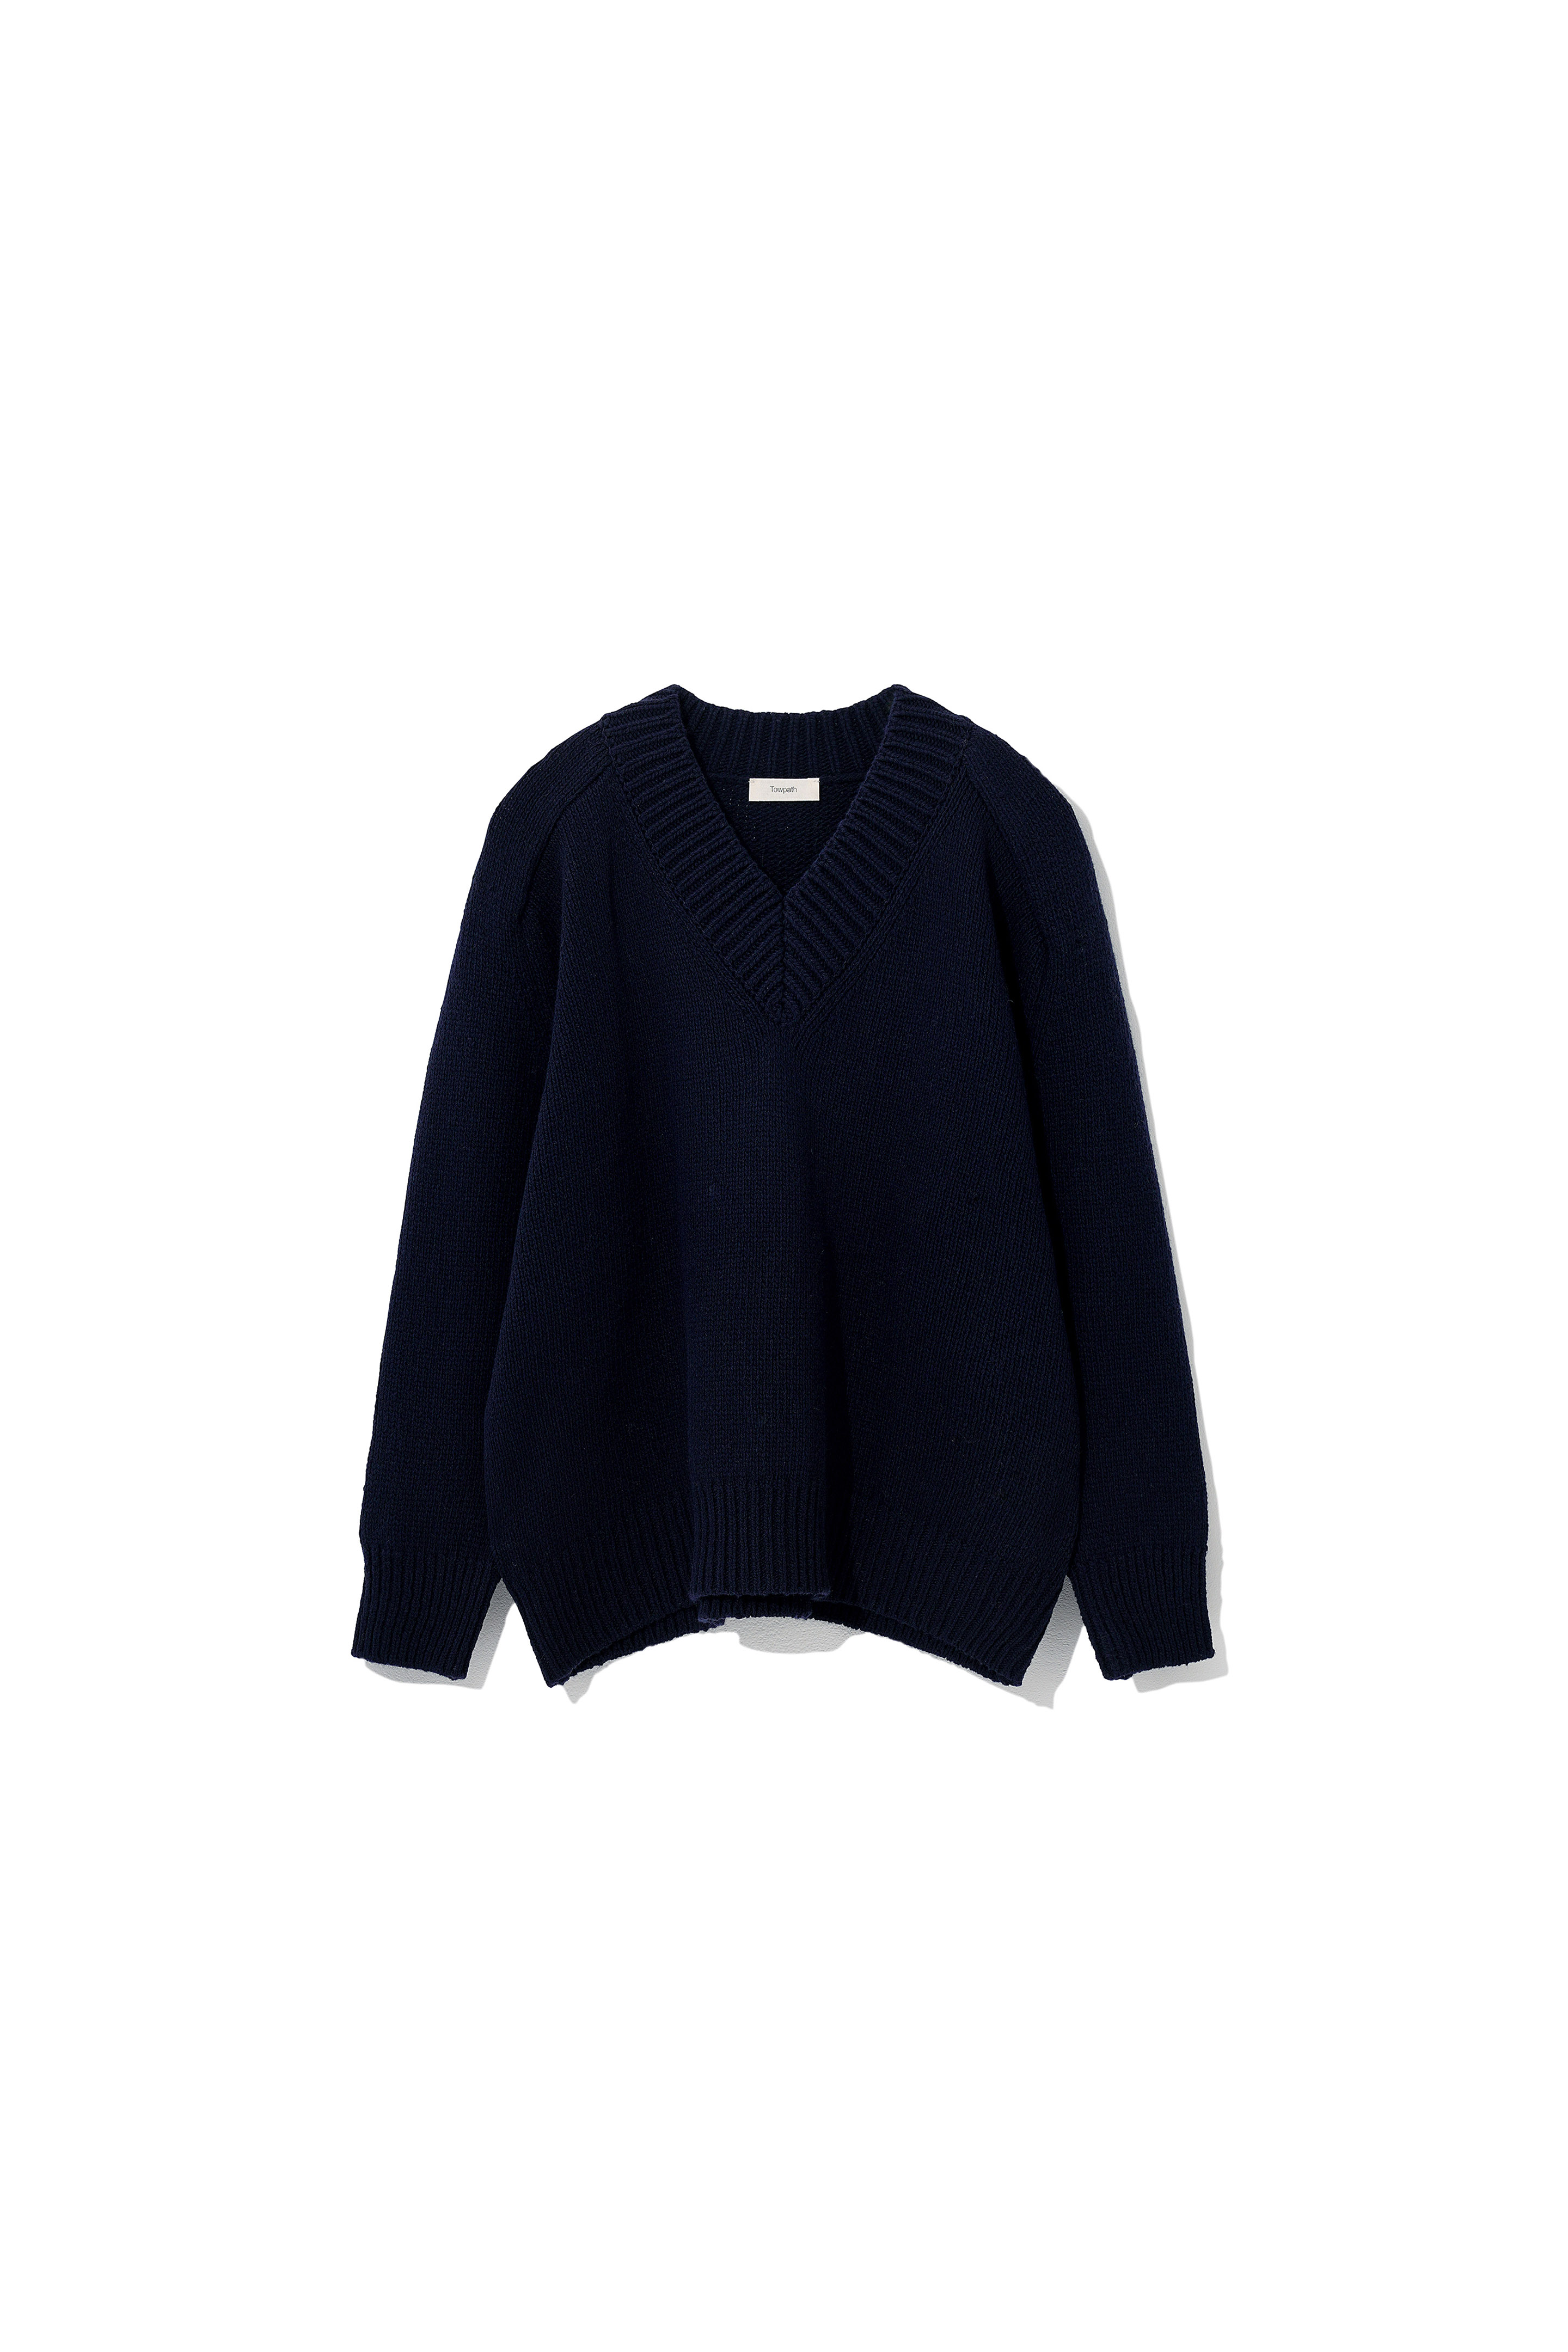 Towpath 010 Bulky Pullover (Navy)